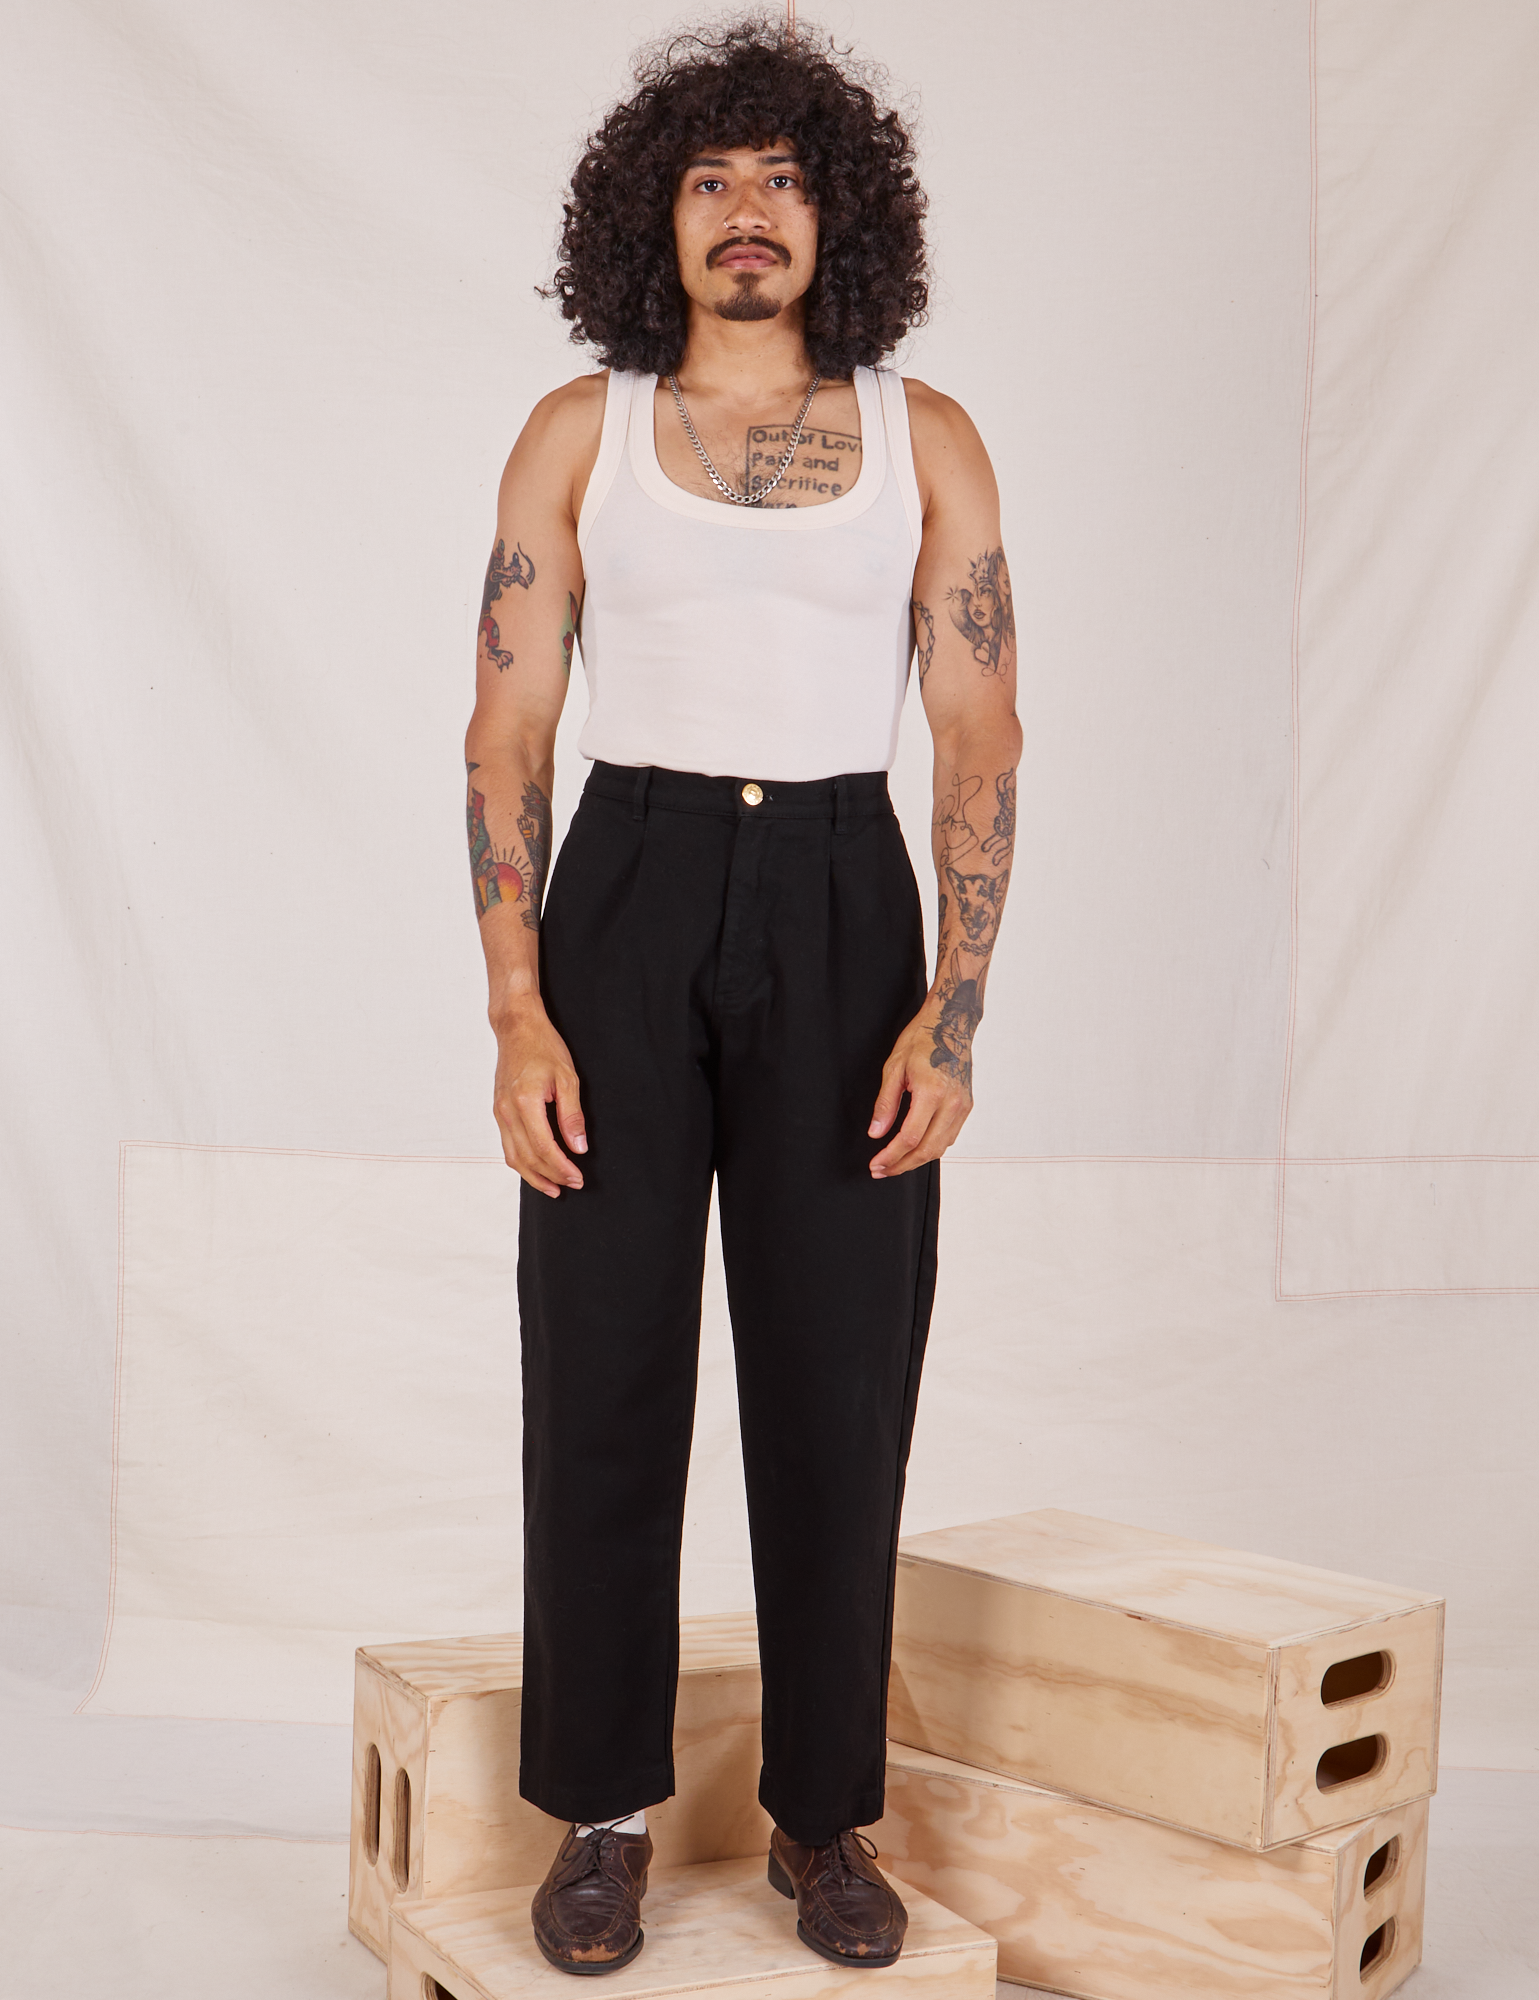 Jesse is 5&#39;8&quot; and wearing XXS Denim Trouser Jeans in Black paired with Tank Top in vintage tee off-white